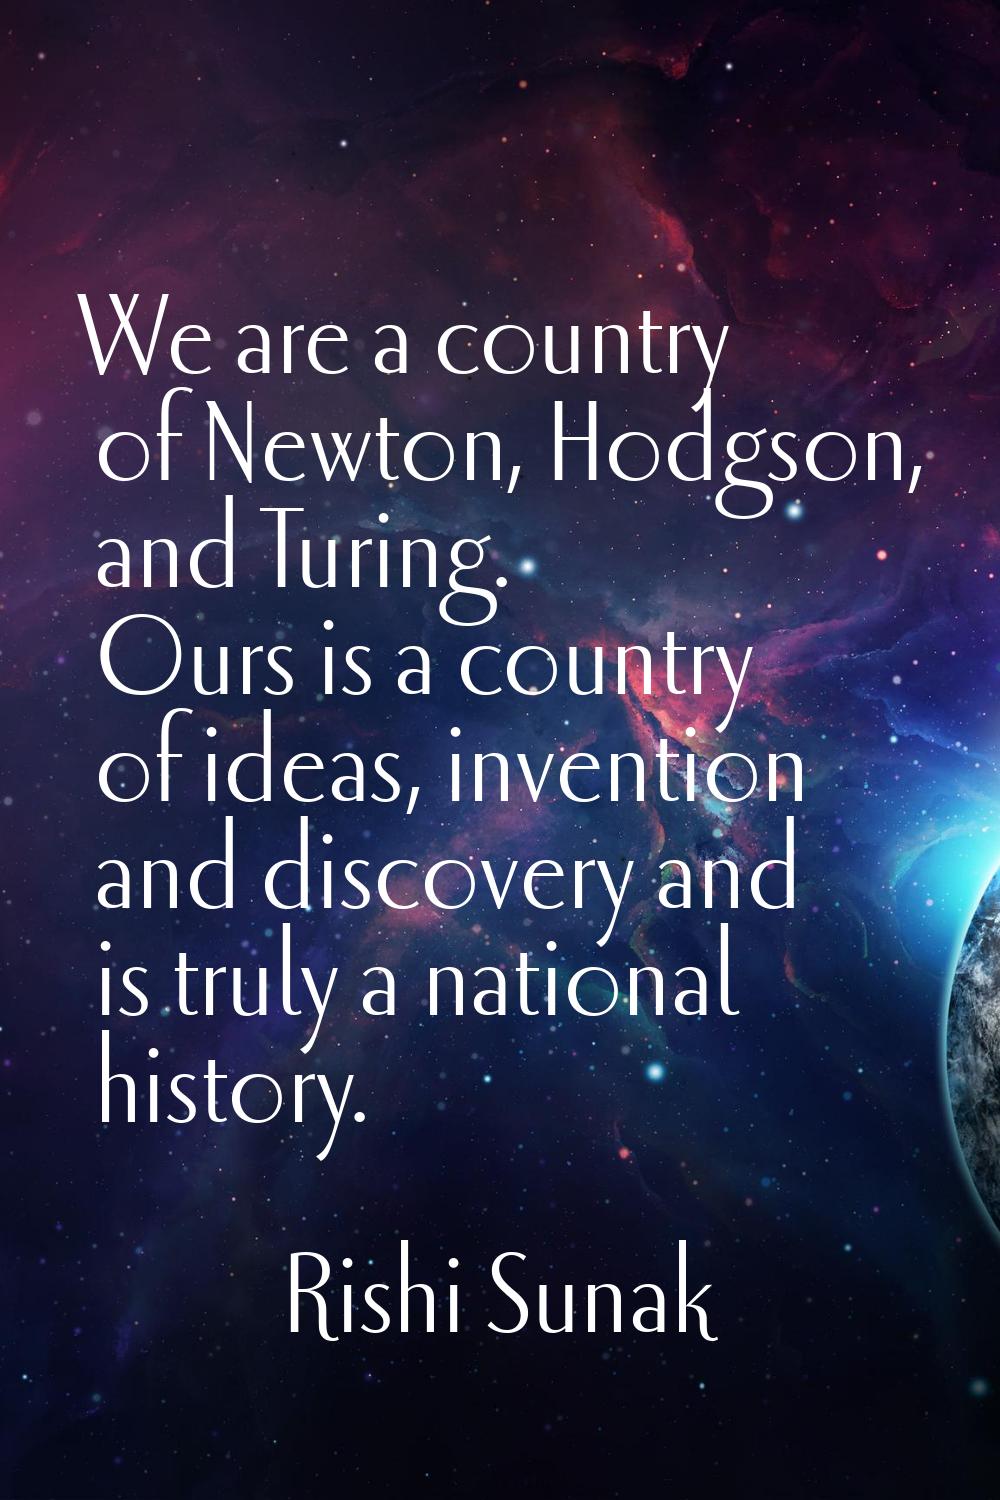 We are a country of Newton, Hodgson, and Turing. Ours is a country of ideas, invention and discover